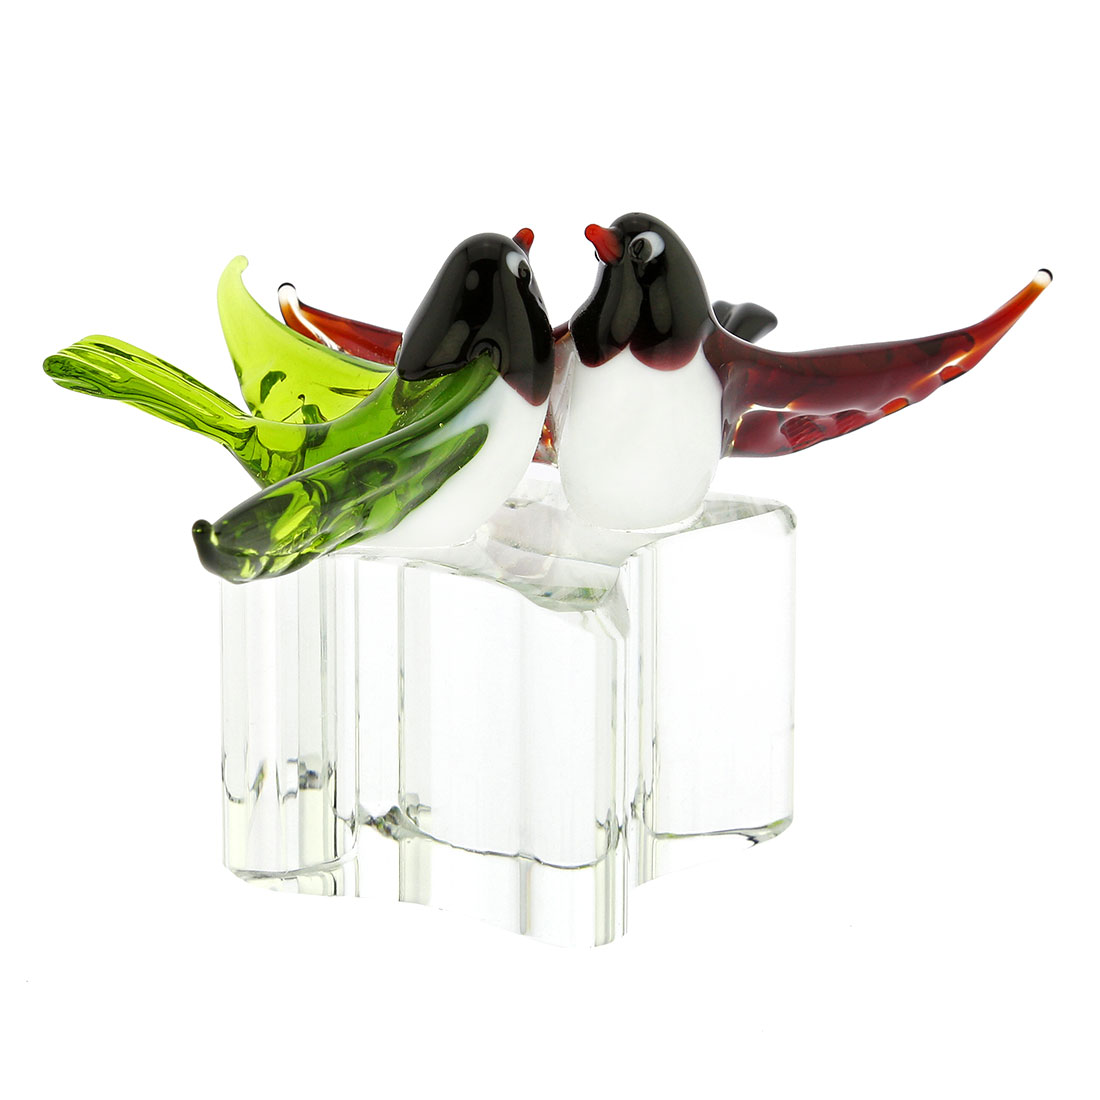 Murano Glass Love Birds - Red and Green